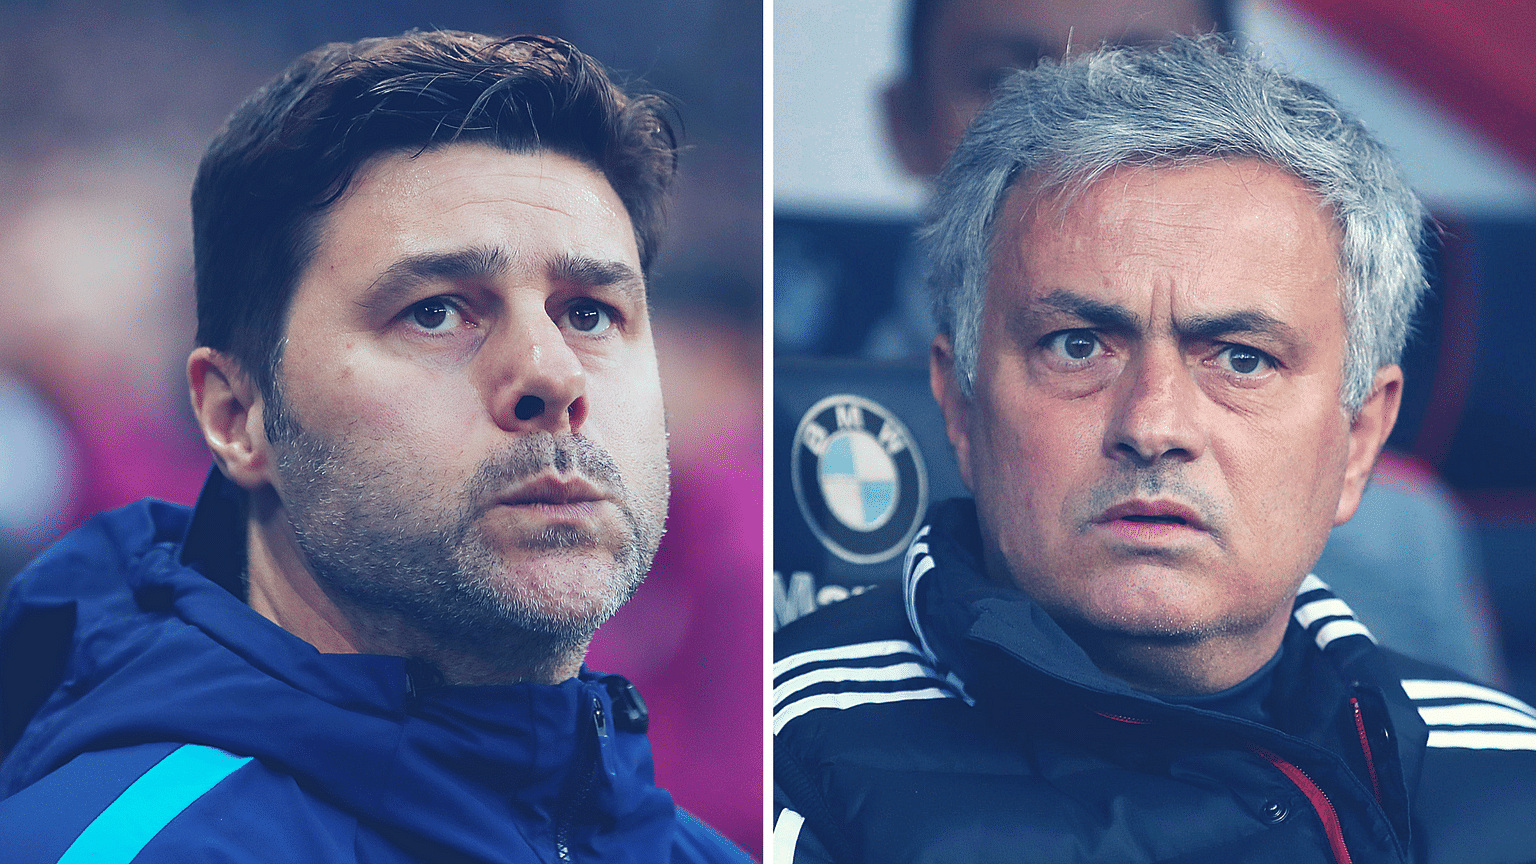 File pictures of Tottenham Hotspur manager Mauricio Pochettino (left) and Manchester United manager Jose Mourinho